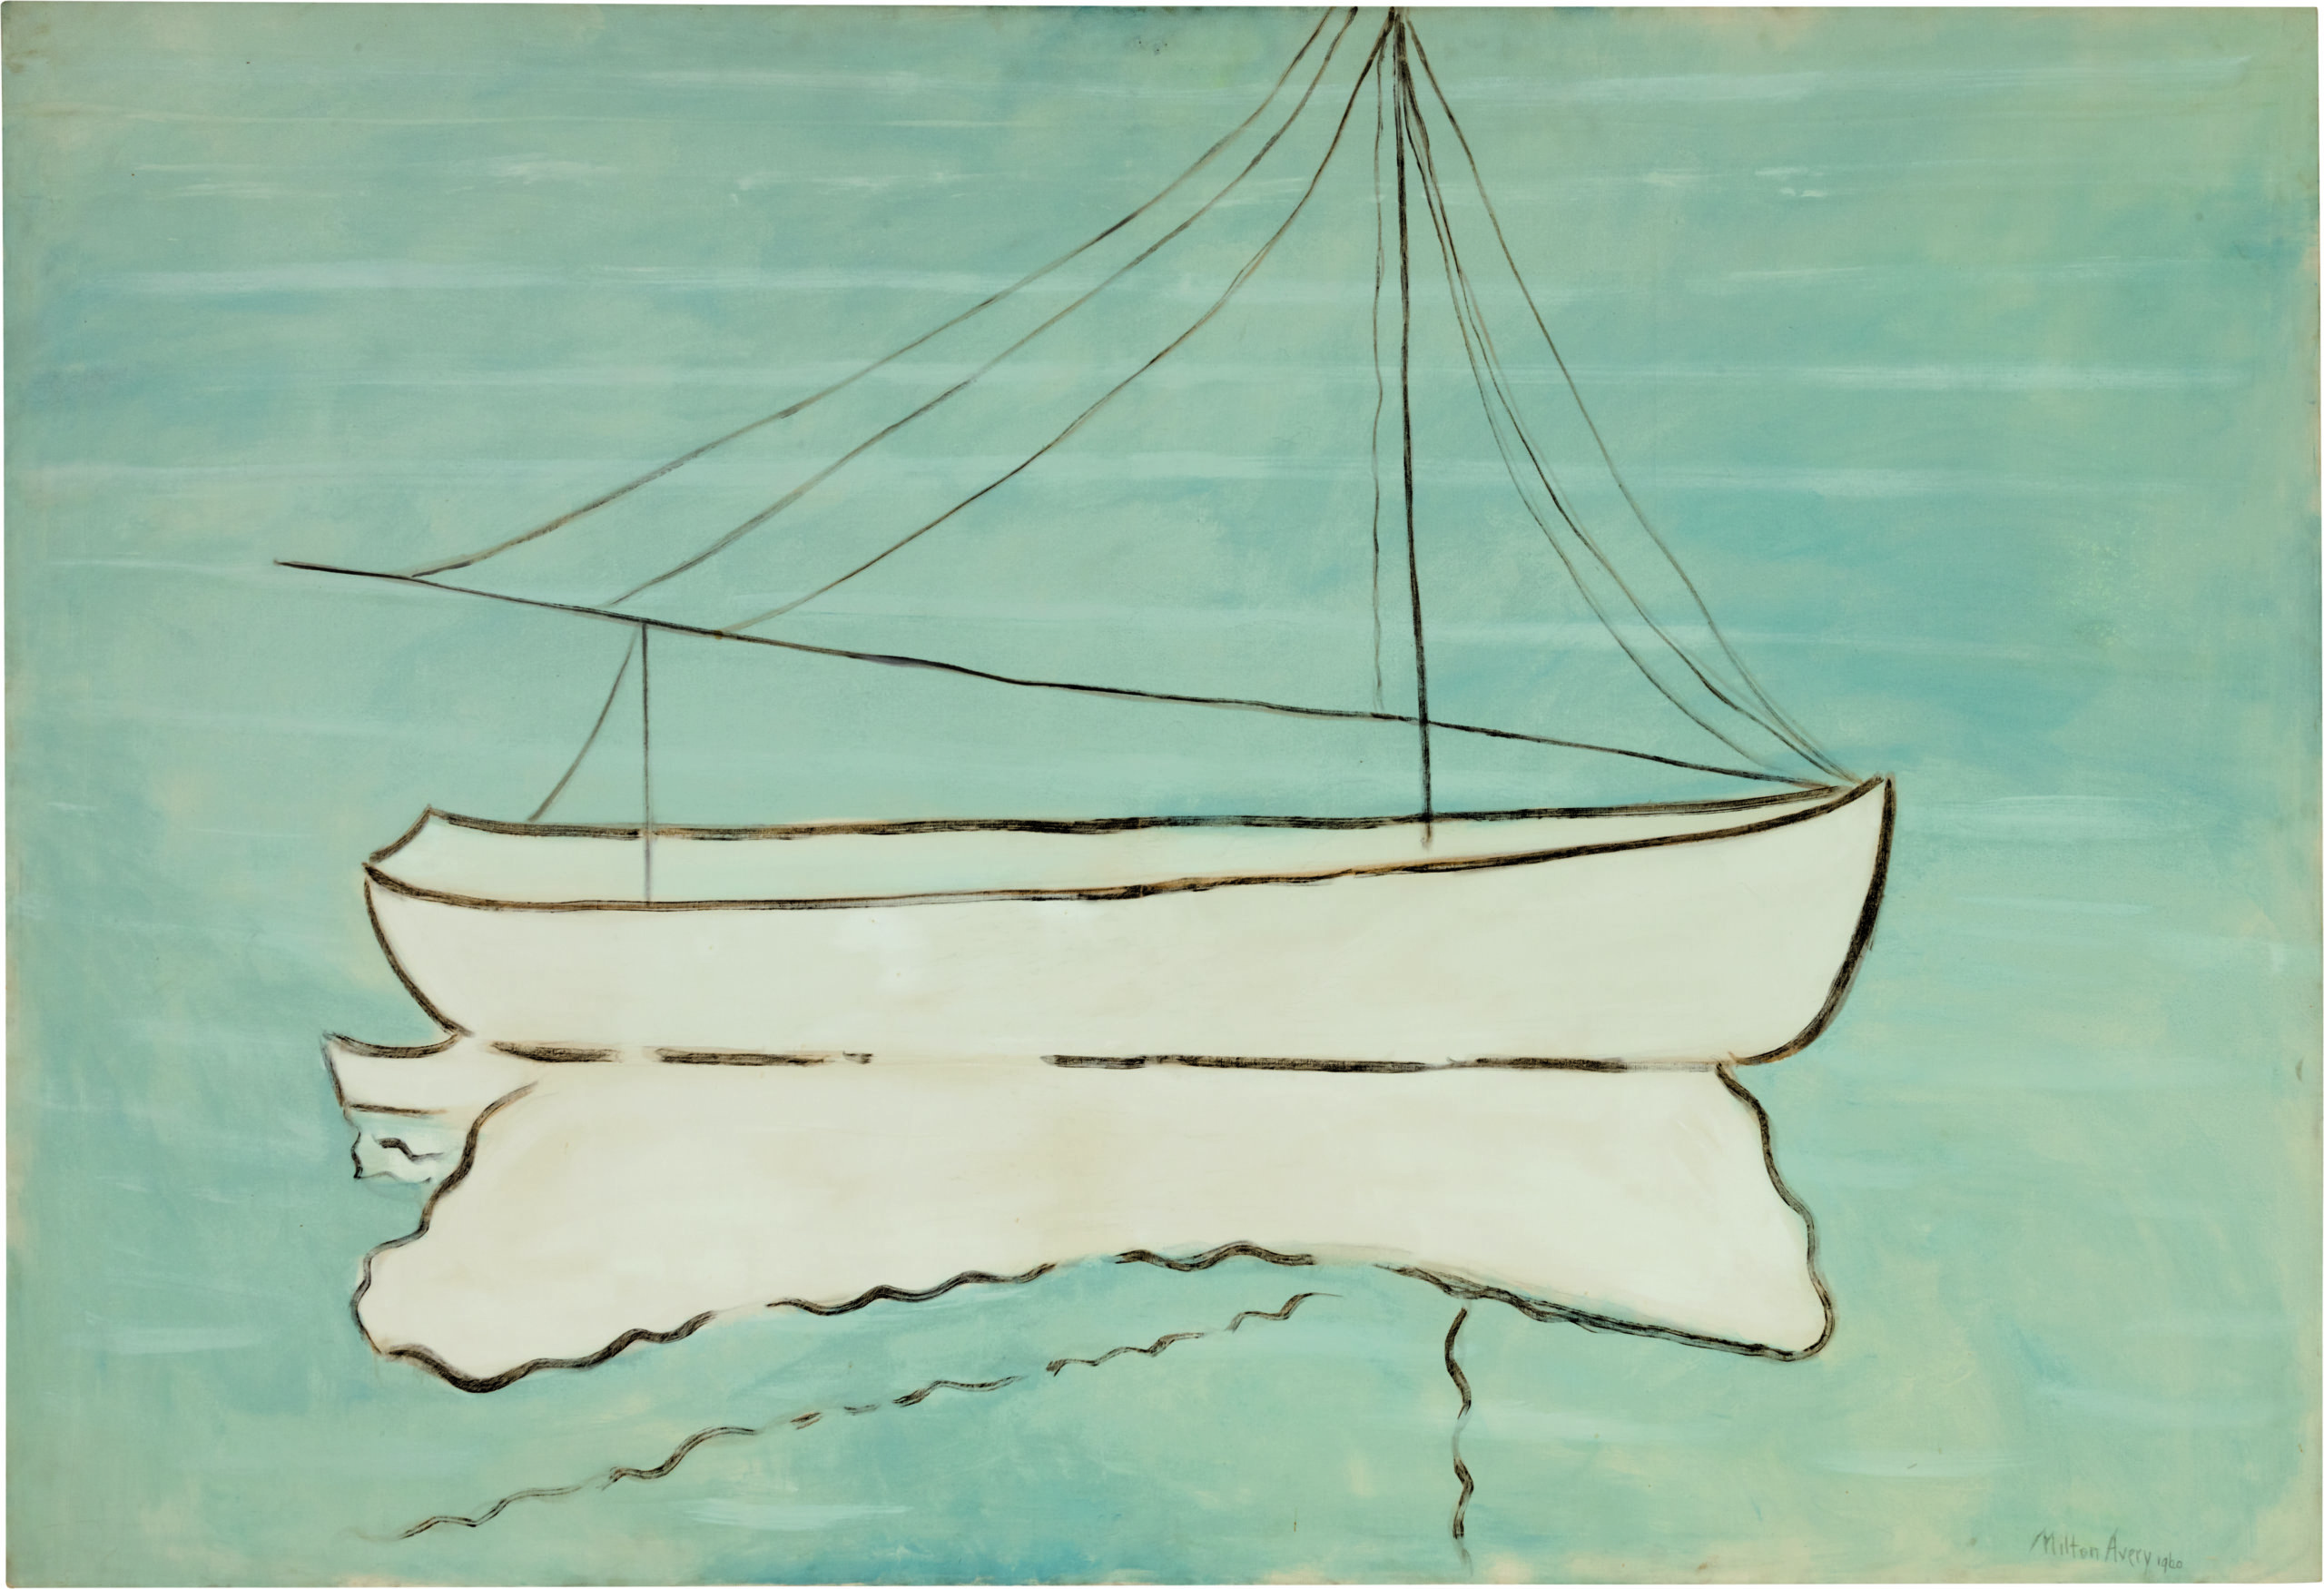 “Solitary Boat” by Milton Avery